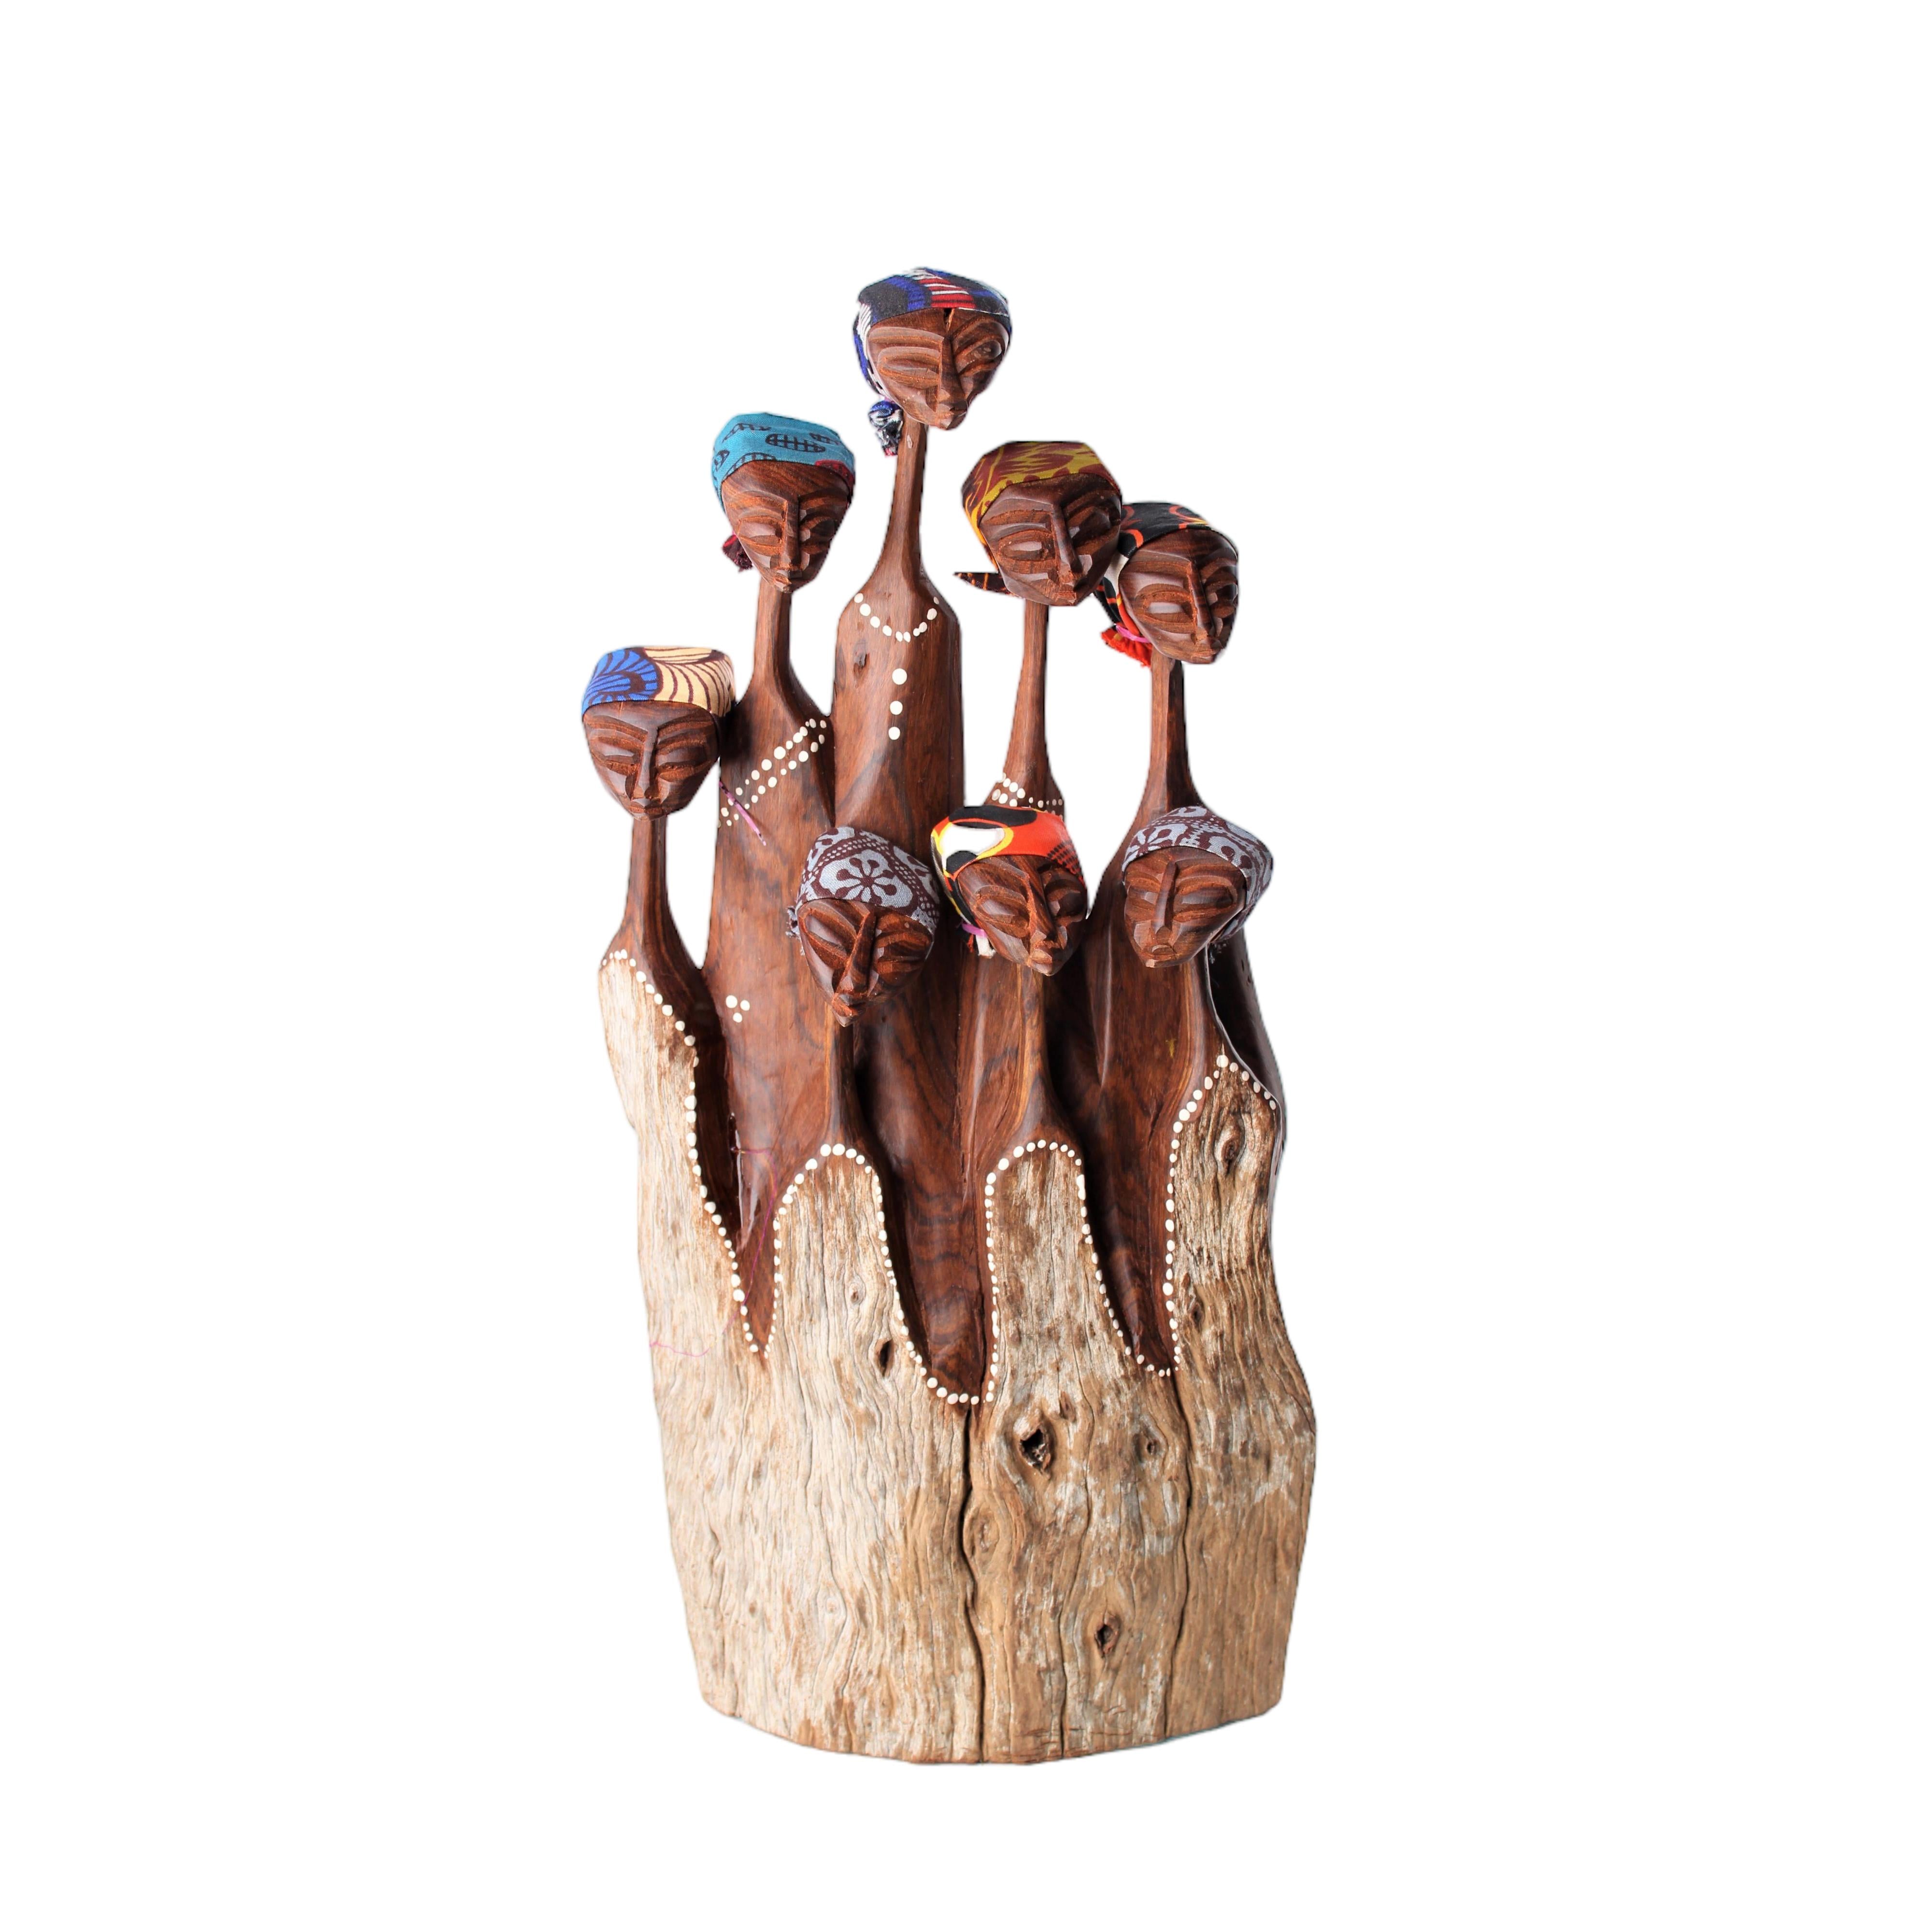 Makonde Tribe Wooden Families ~16.5" Tall - Wooden Families